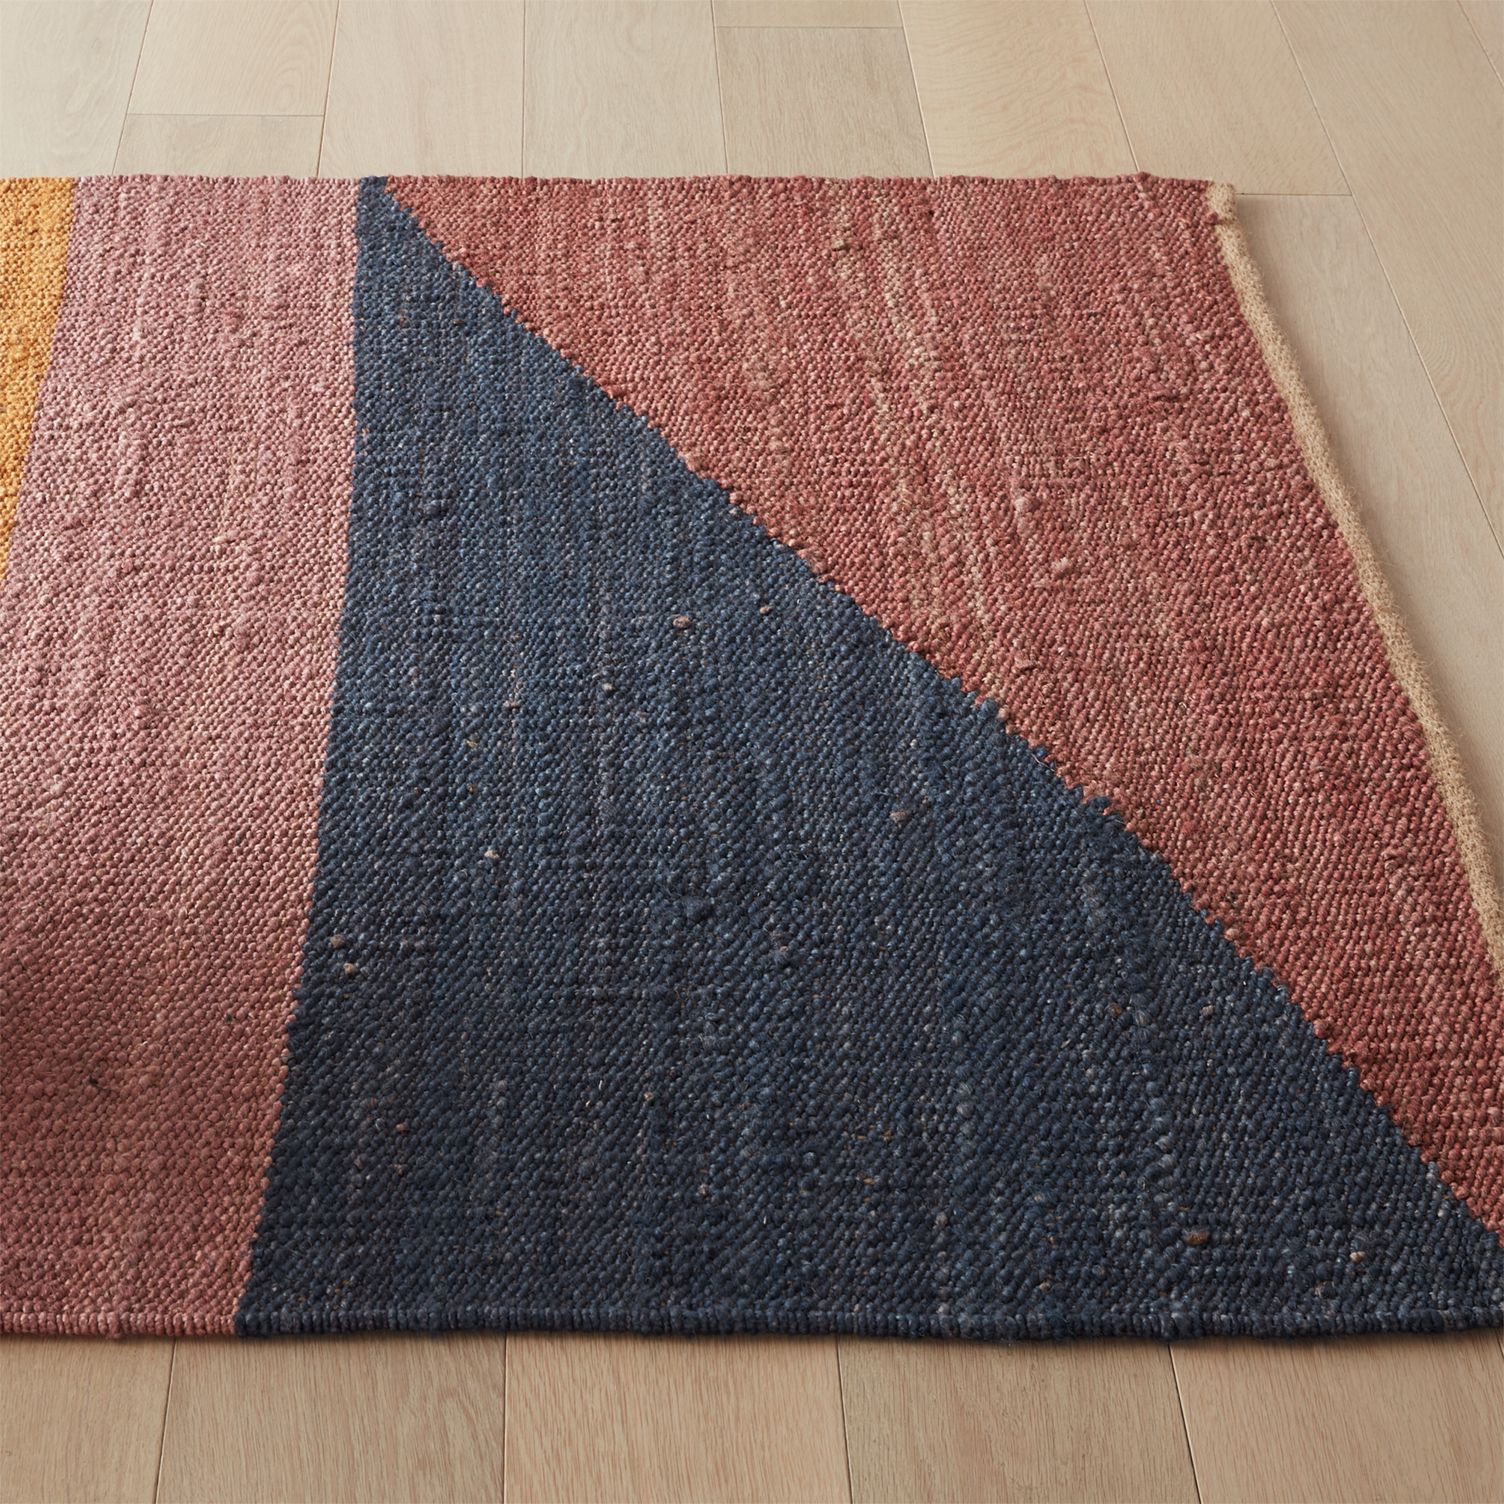 Jute rug in warm tones from CB2